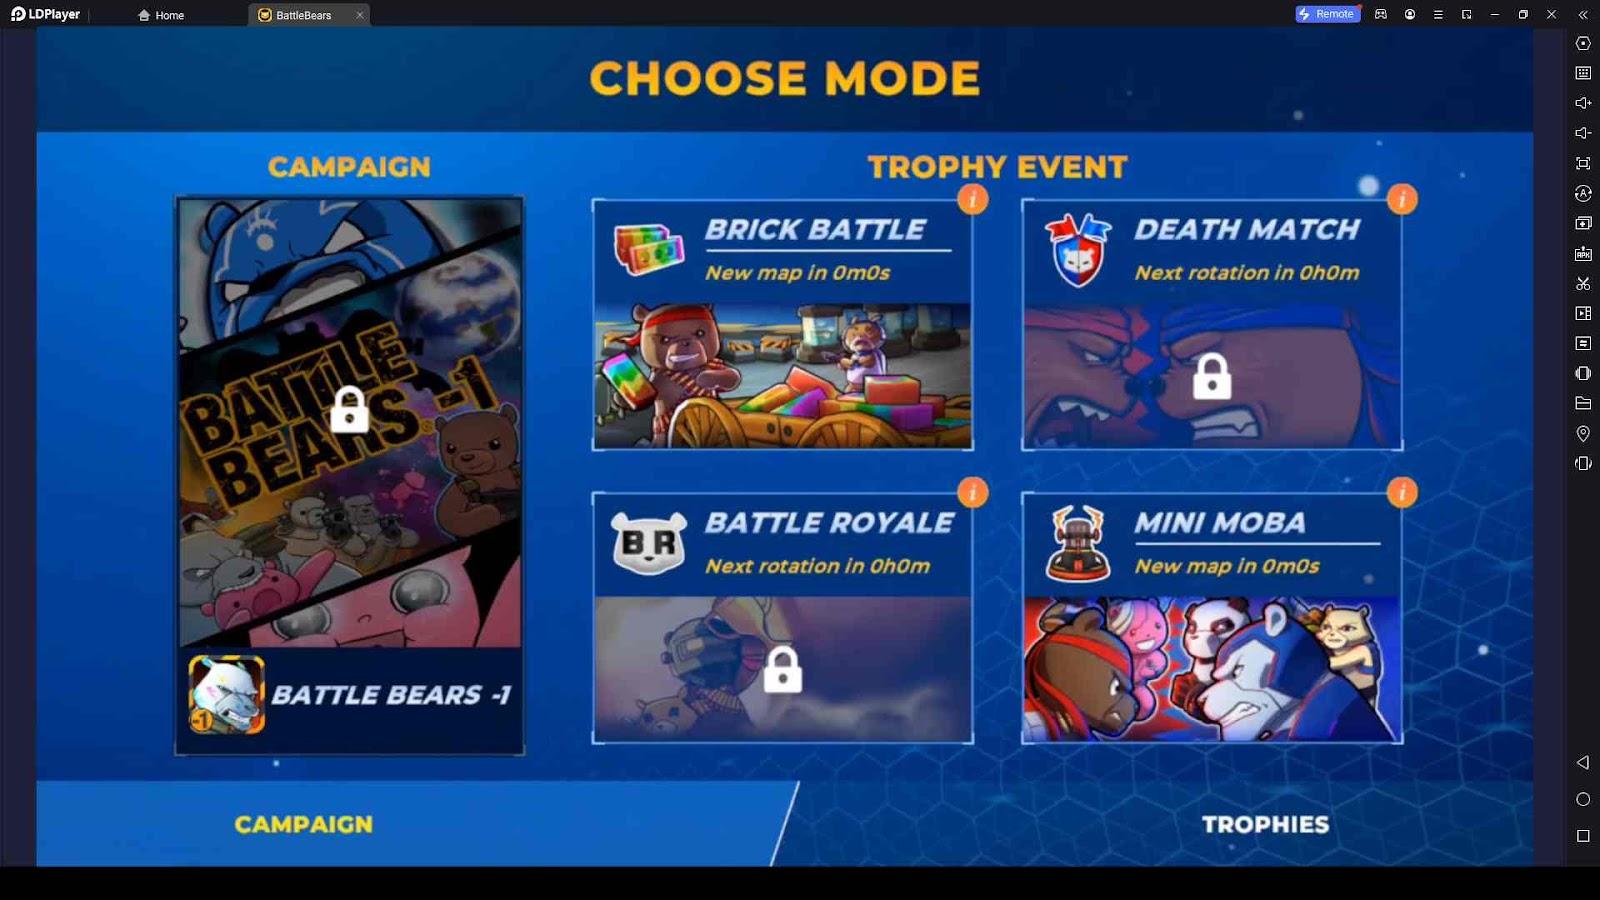 Awesome Battle Modes to Try in BATTLE BEARS HEROES